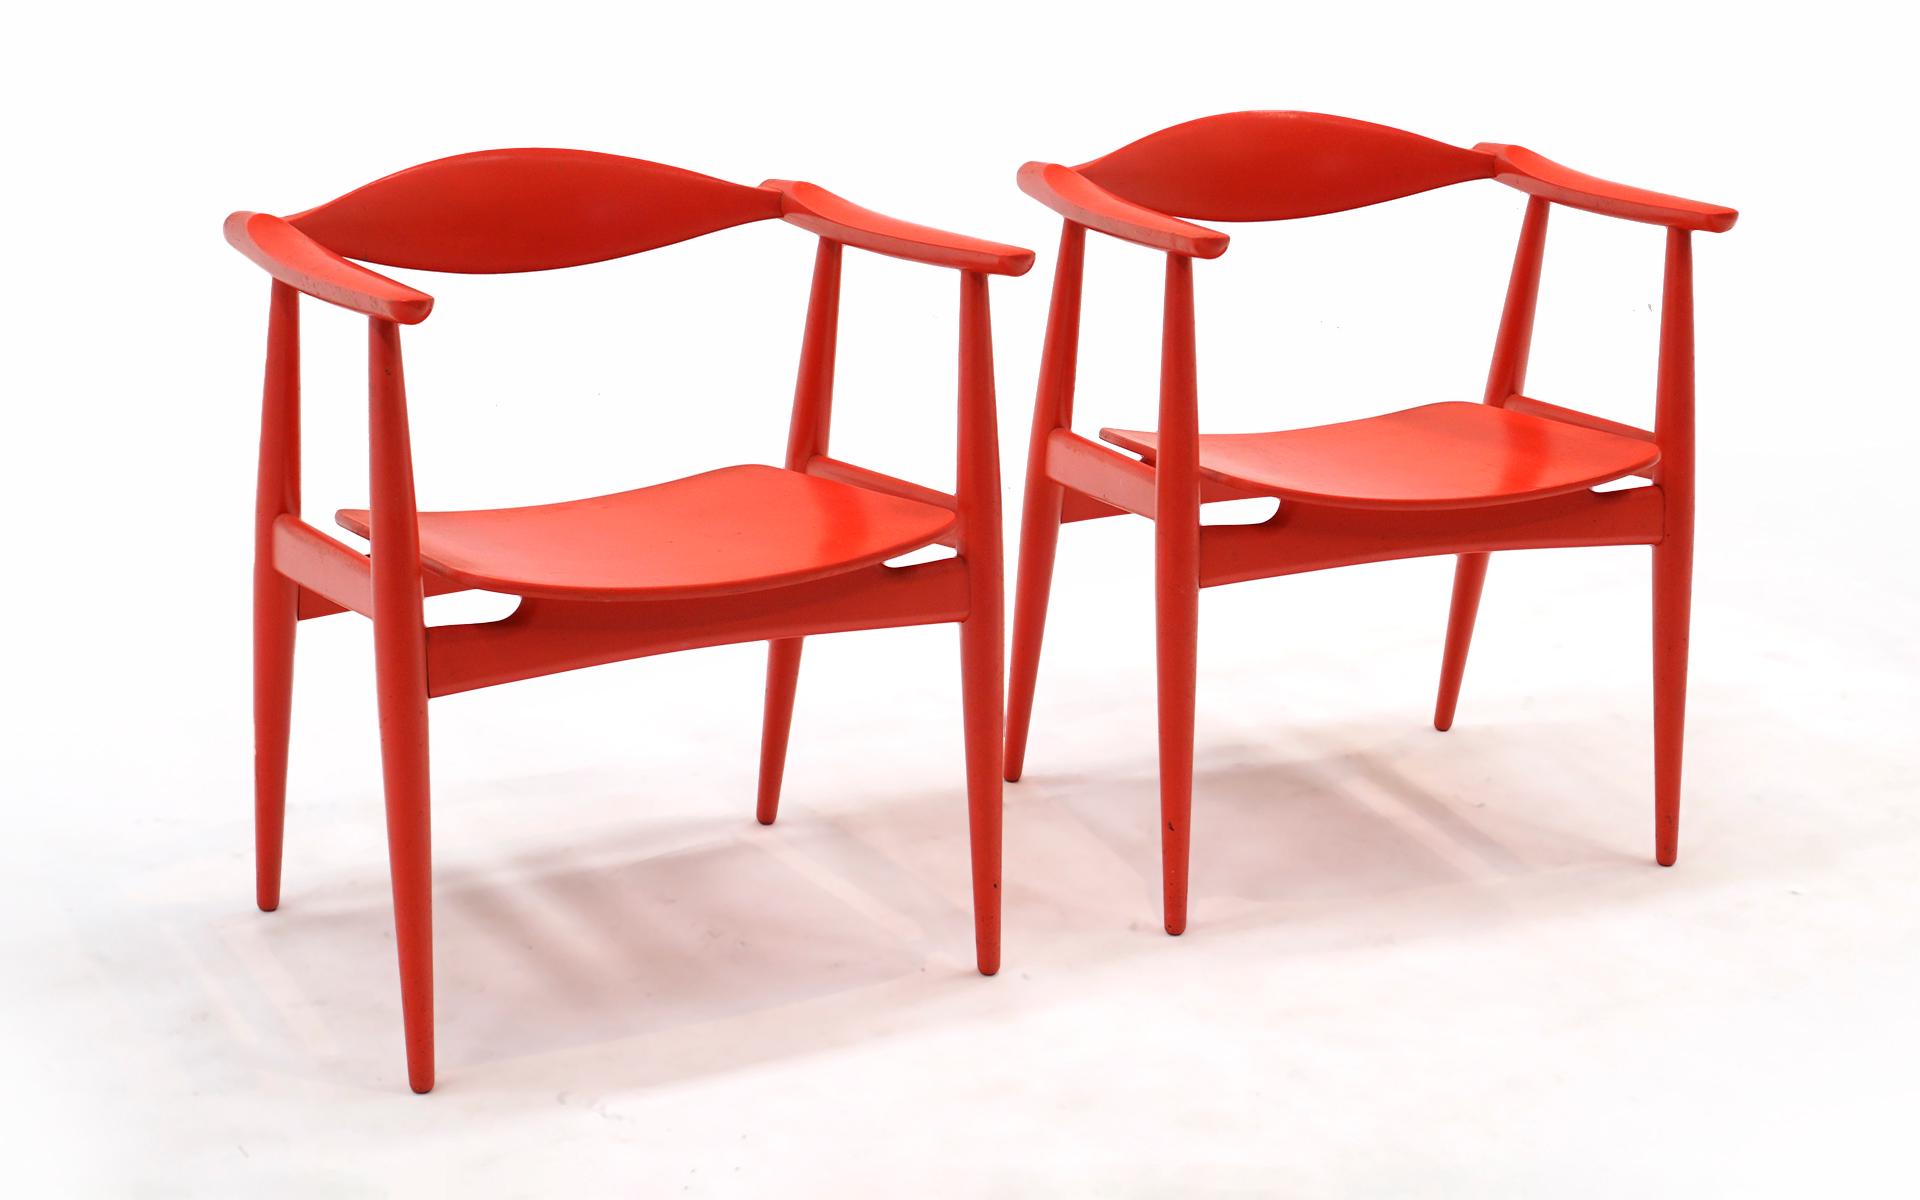 Scandinavian Modern Rare Pair of Red Hans Wegner Arm Chairs for Hansen and Son. Original. Signed. For Sale